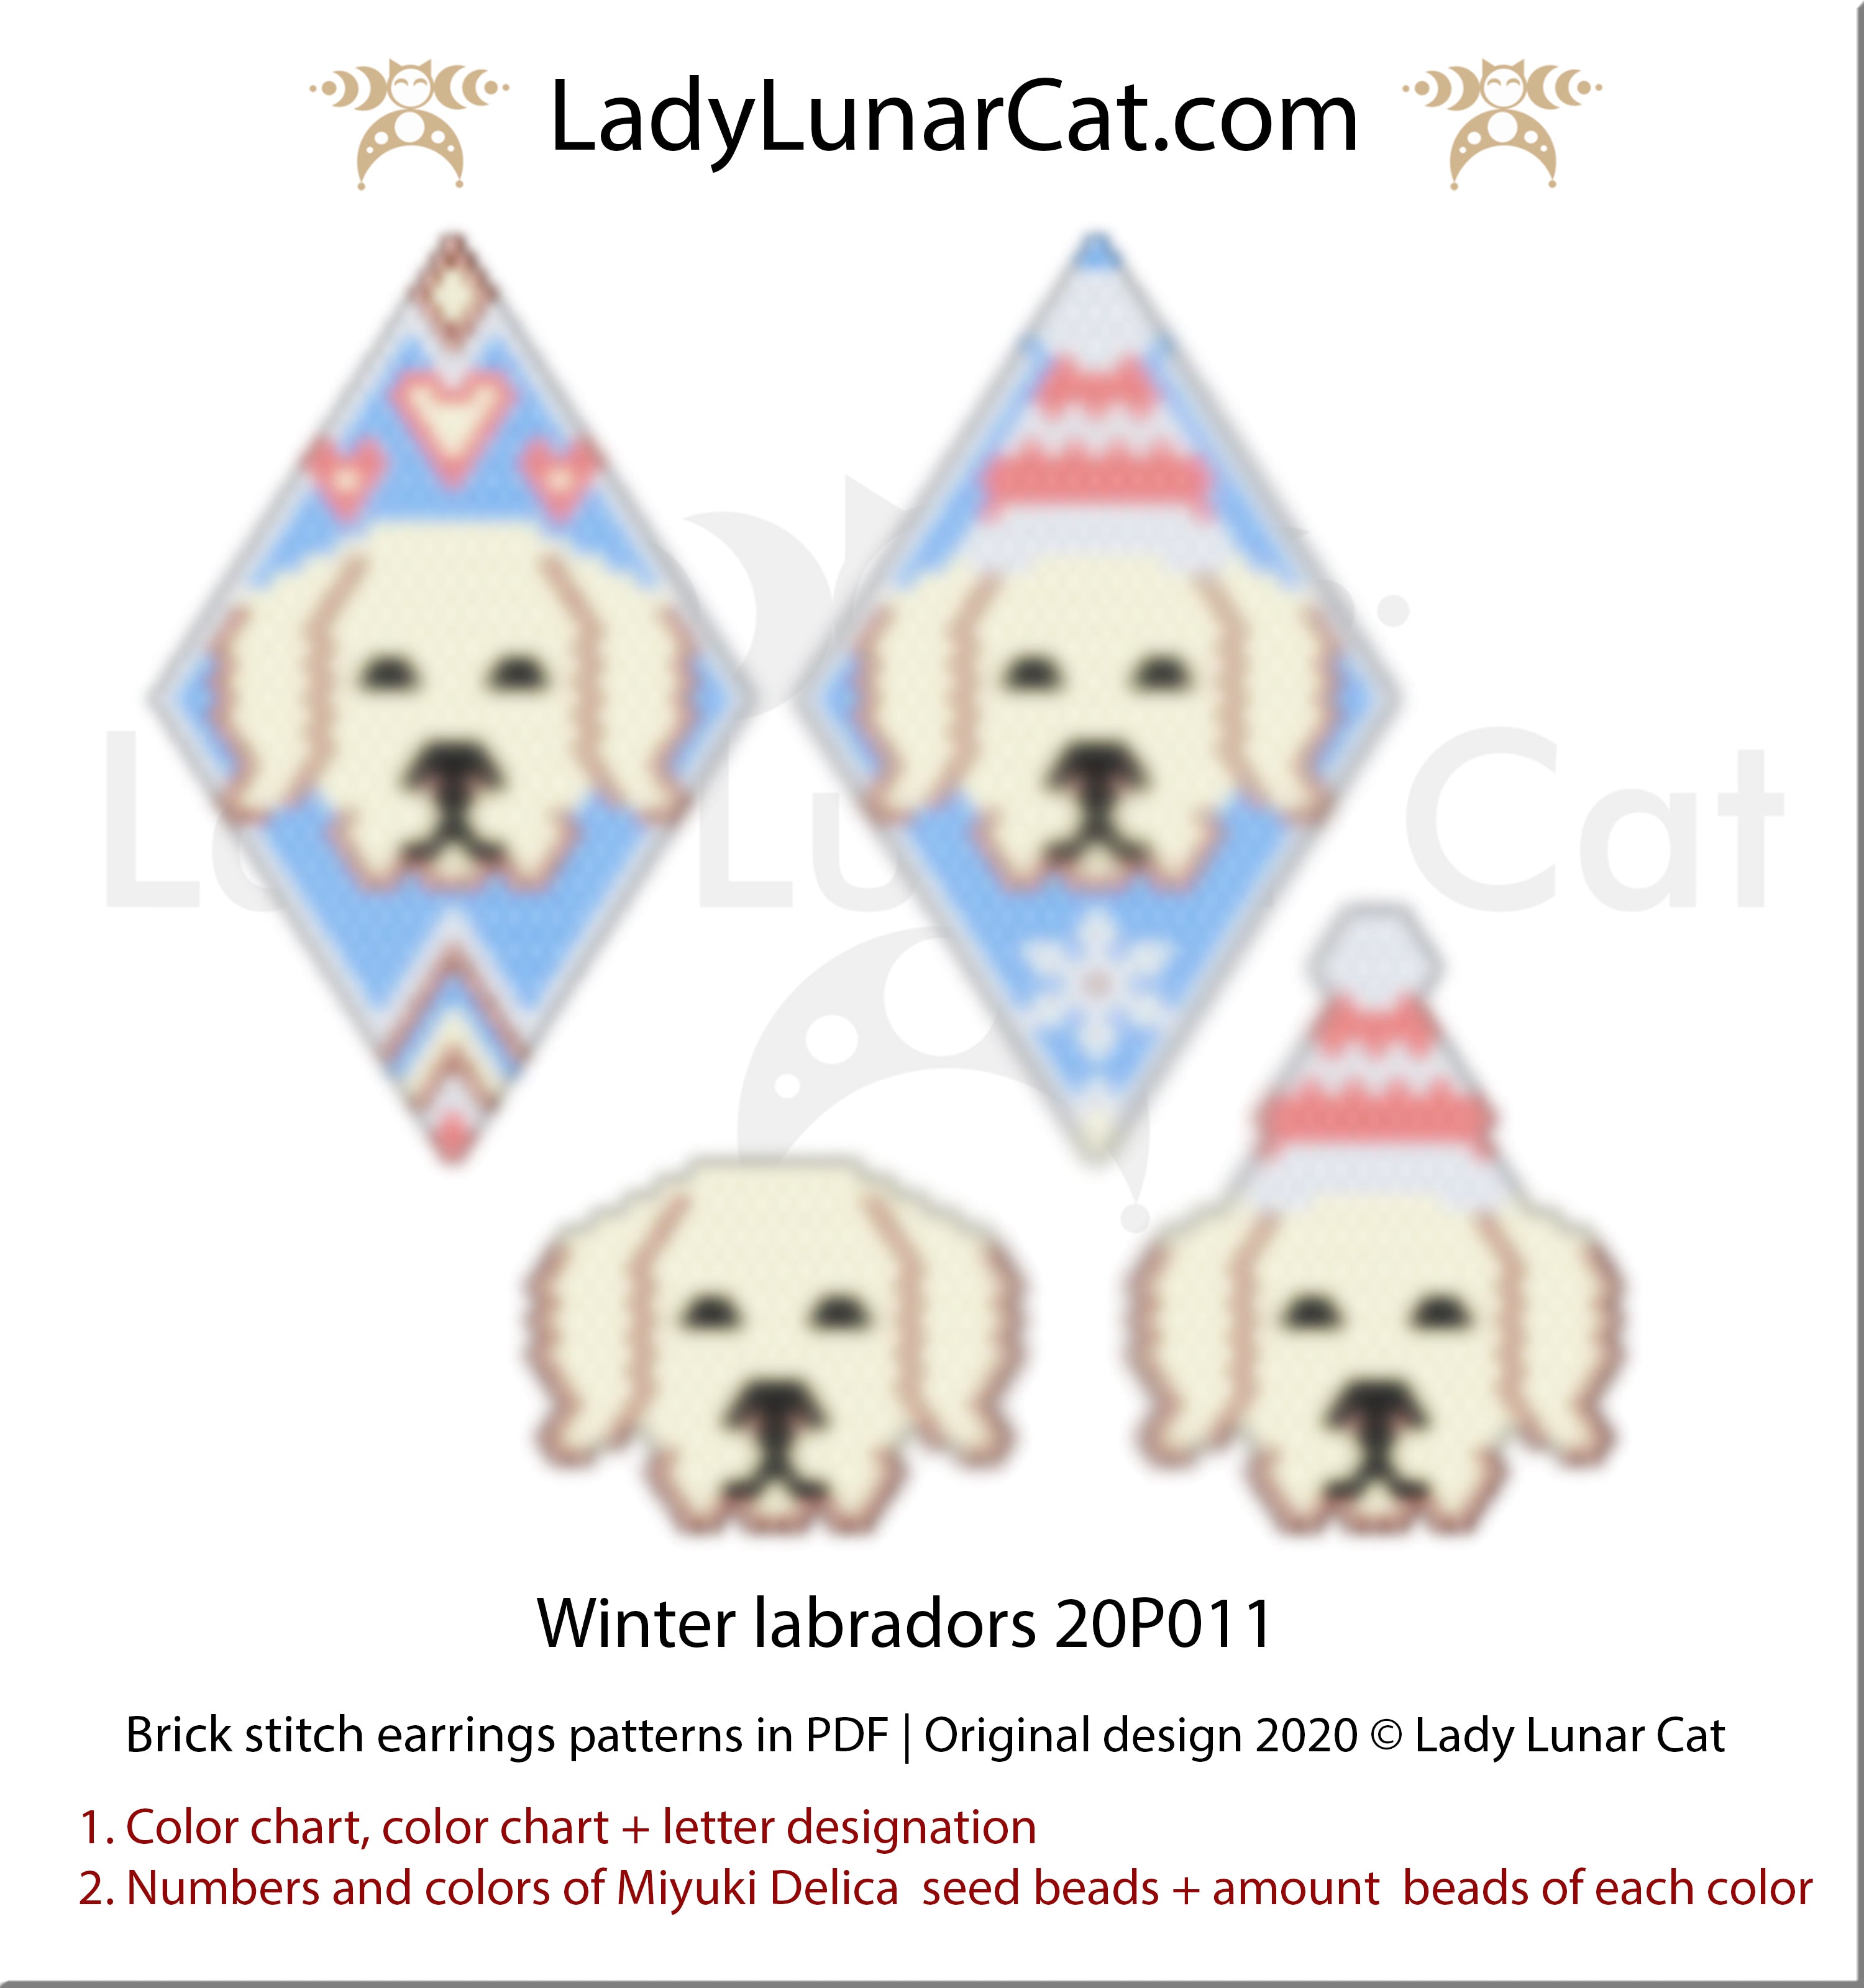 Brick stitch pattern for beading Winter Labradors 20P010 | Christmas beaded earrings tutorial by Lady Lunar Cat